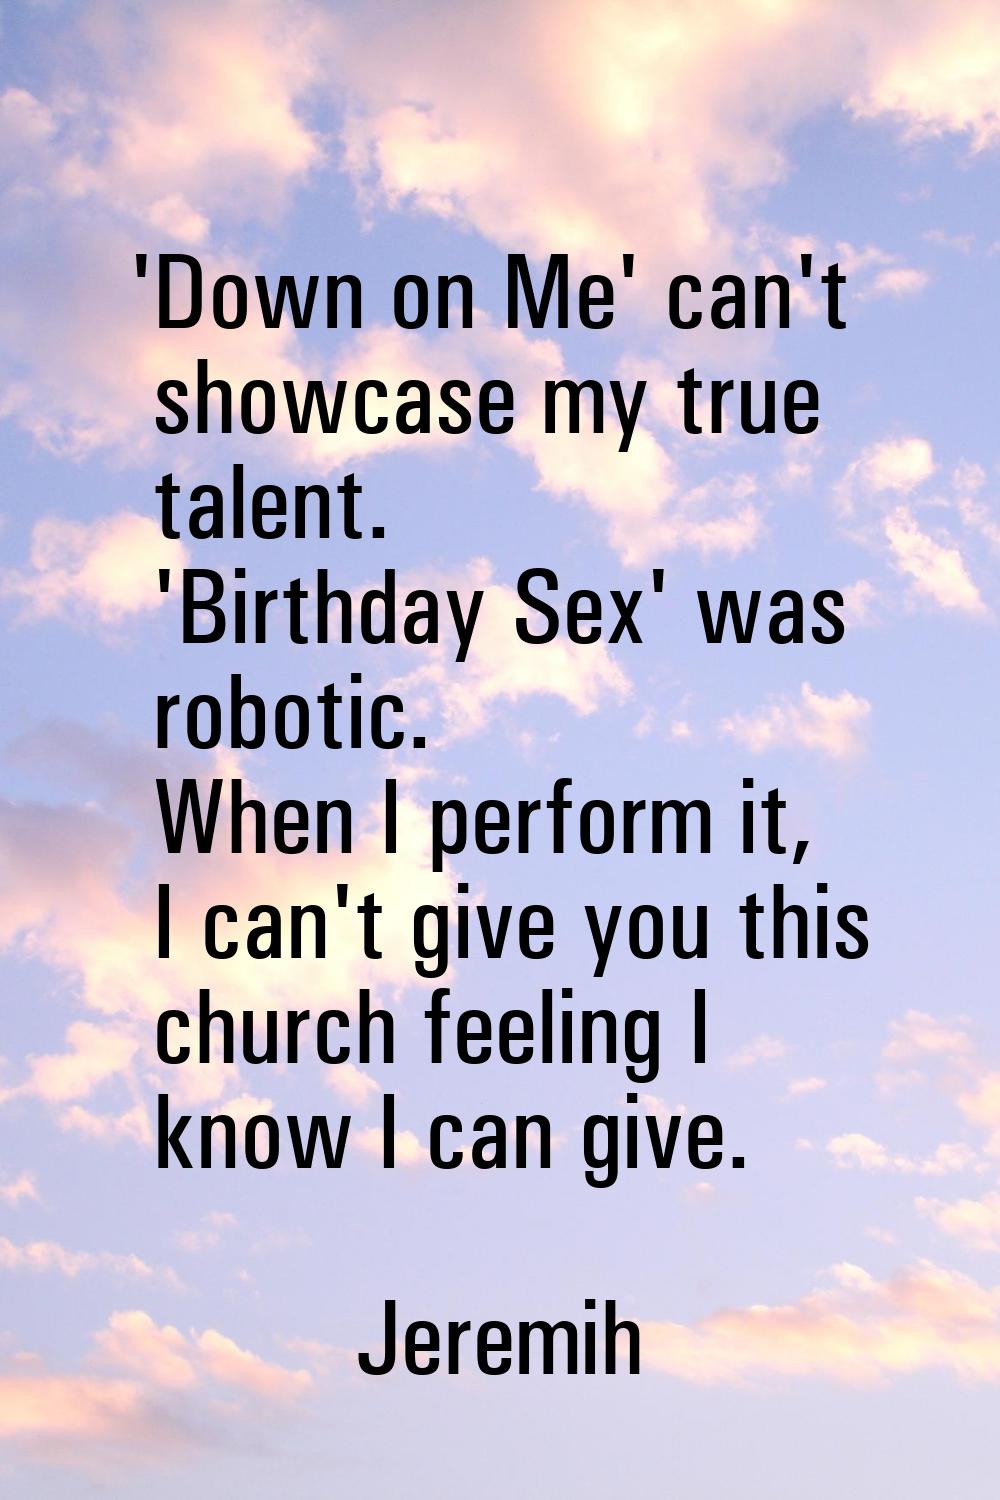 'Down on Me' can't showcase my true talent. 'Birthday Sex' was robotic. When I perform it, I can't 